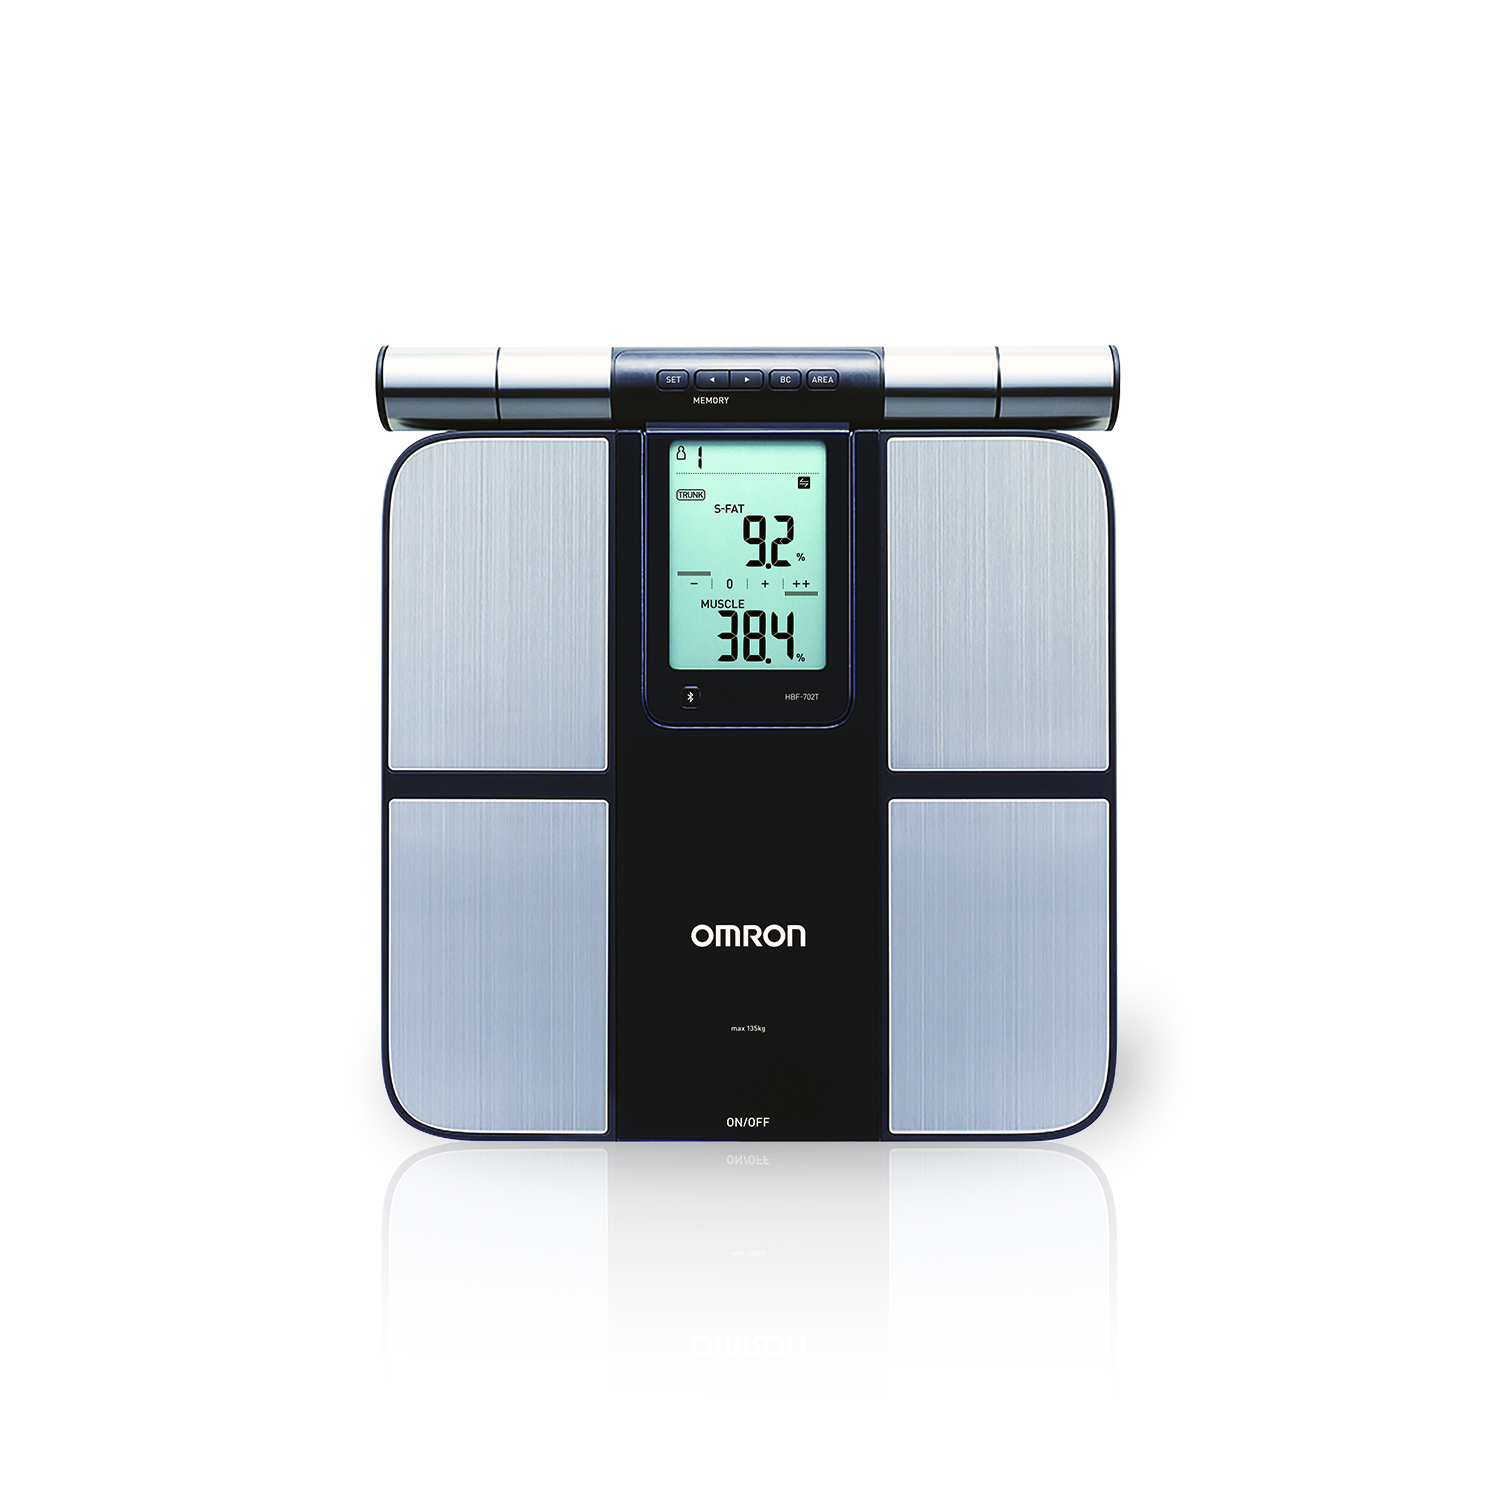 Omron HBF 702T Bluetooth Body Composition Monitor